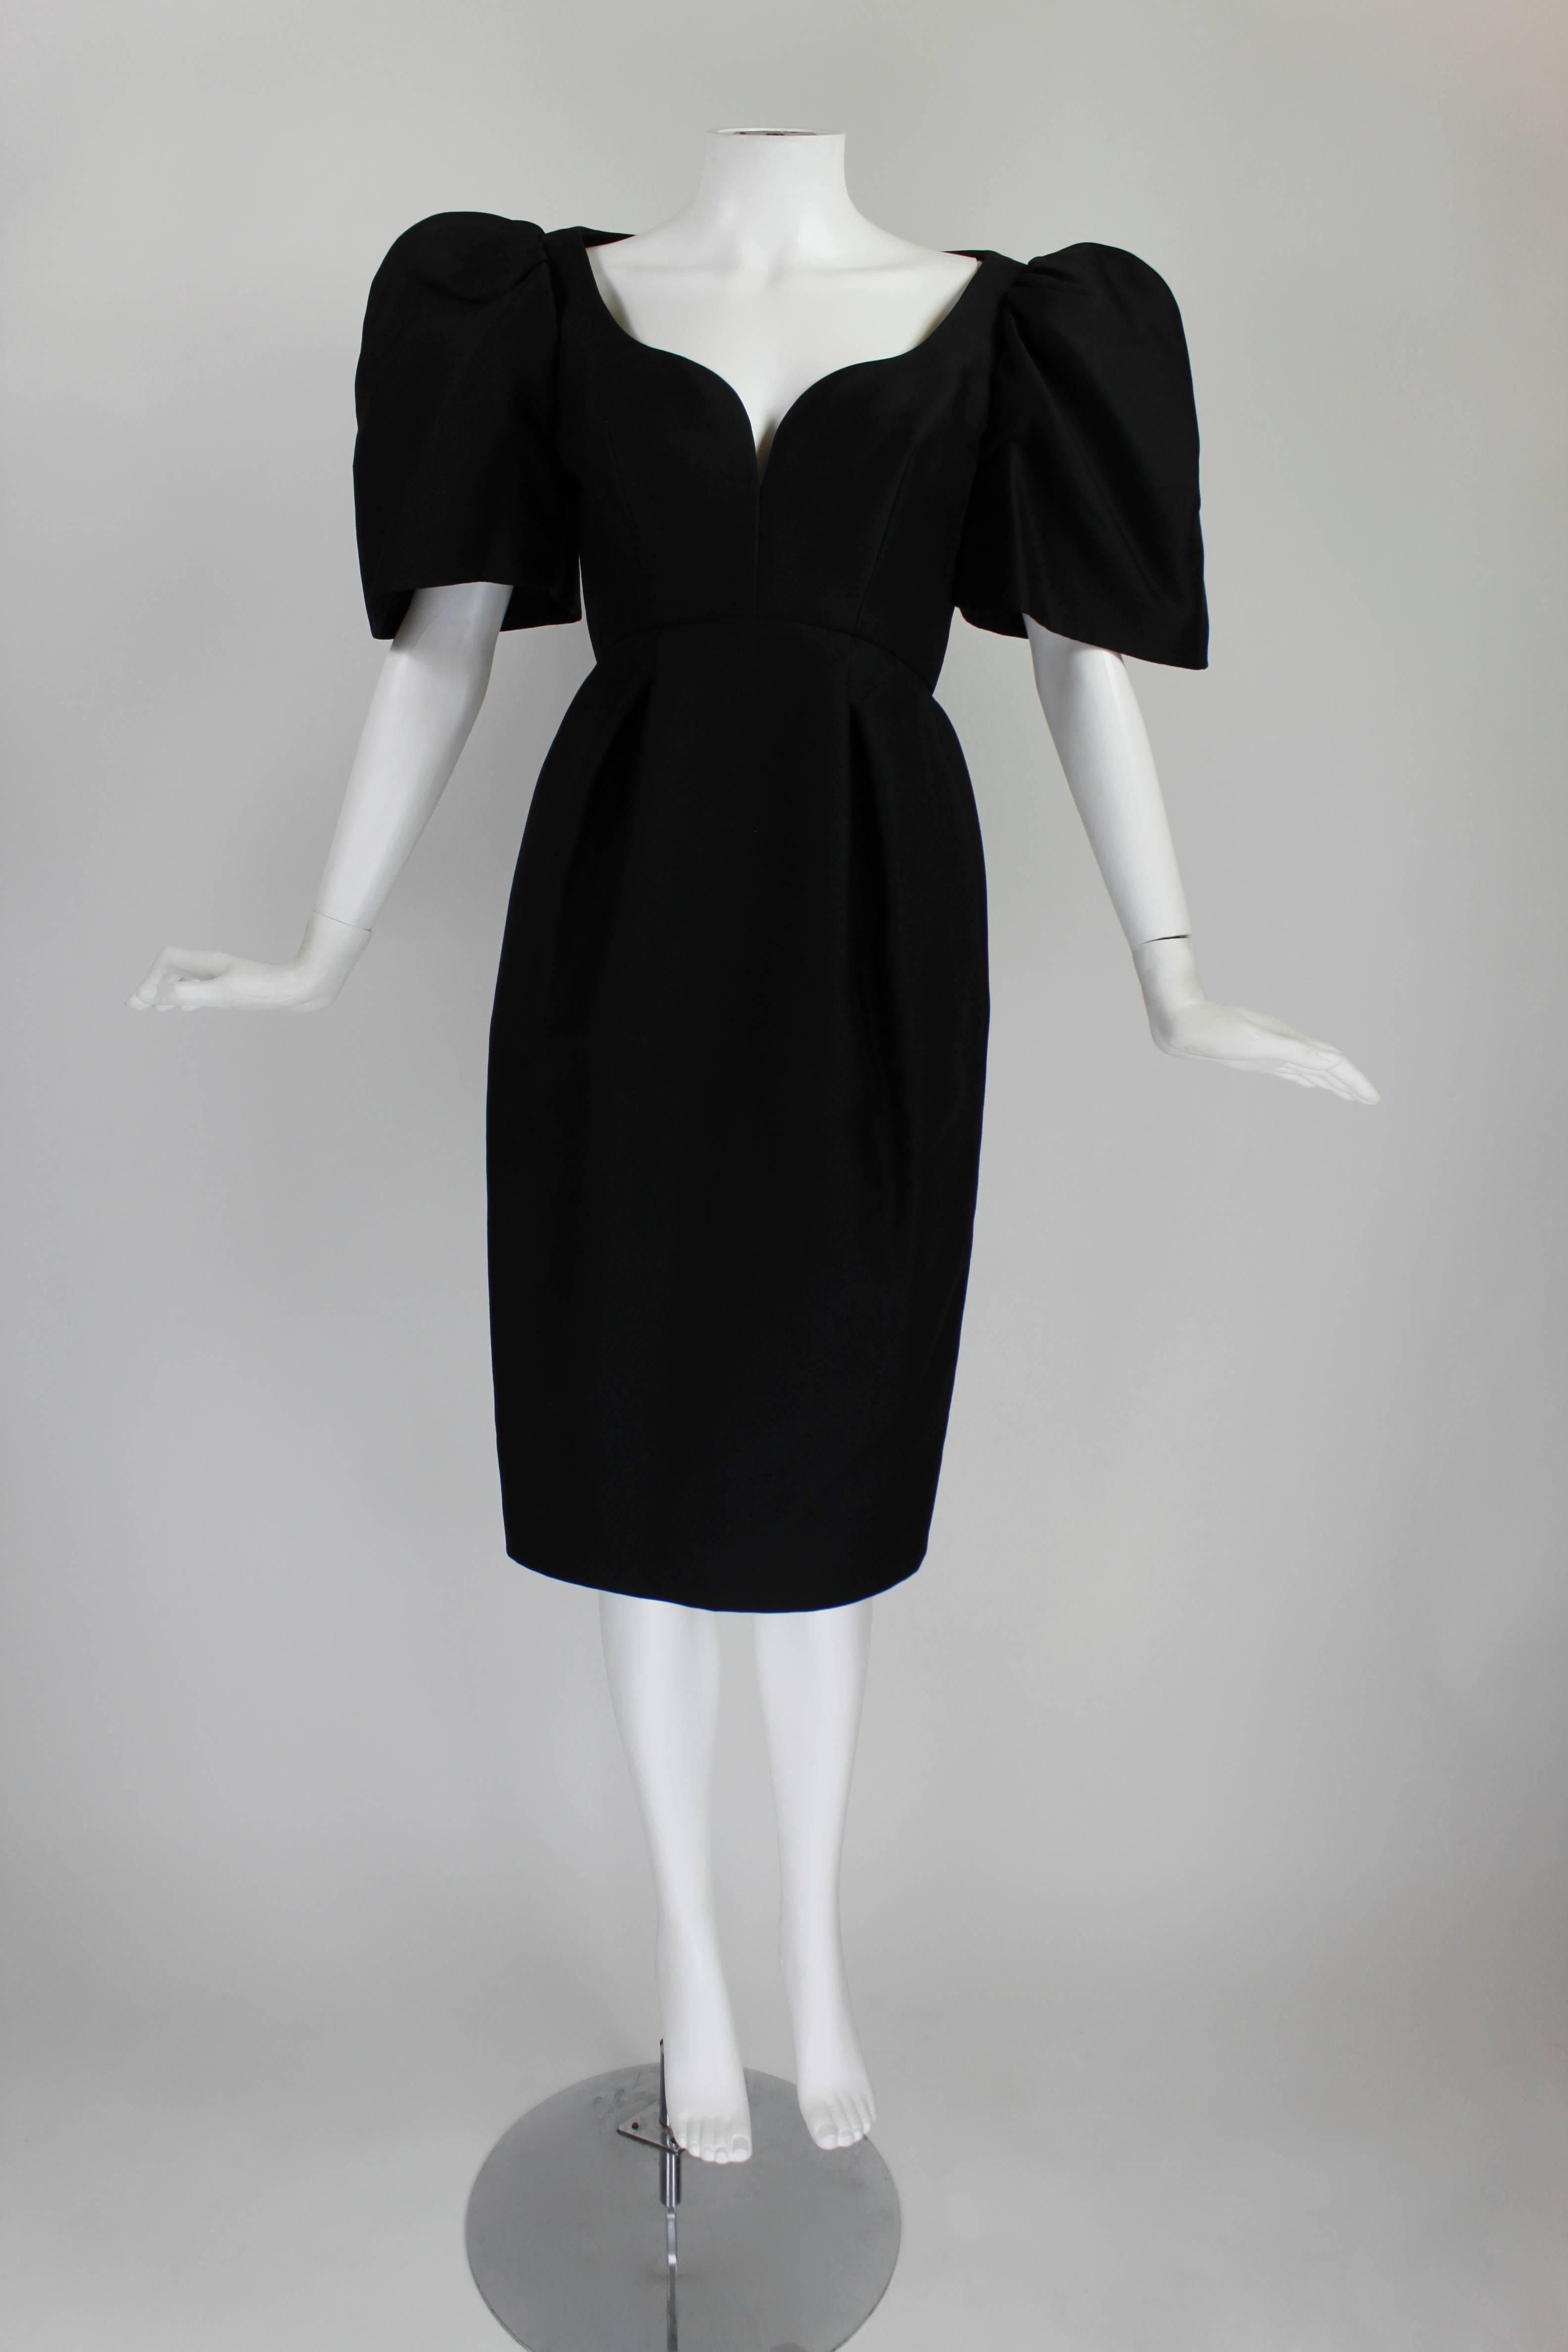 This absolutely stunning cocktail dress from Galanos features beautiful tailoring combined with an interesting, unique silhouette. The strong, tall bell sleeves are balanced by a nipped waist and tulip-shaped hip pleats. 

-Fully lined
-Zips in